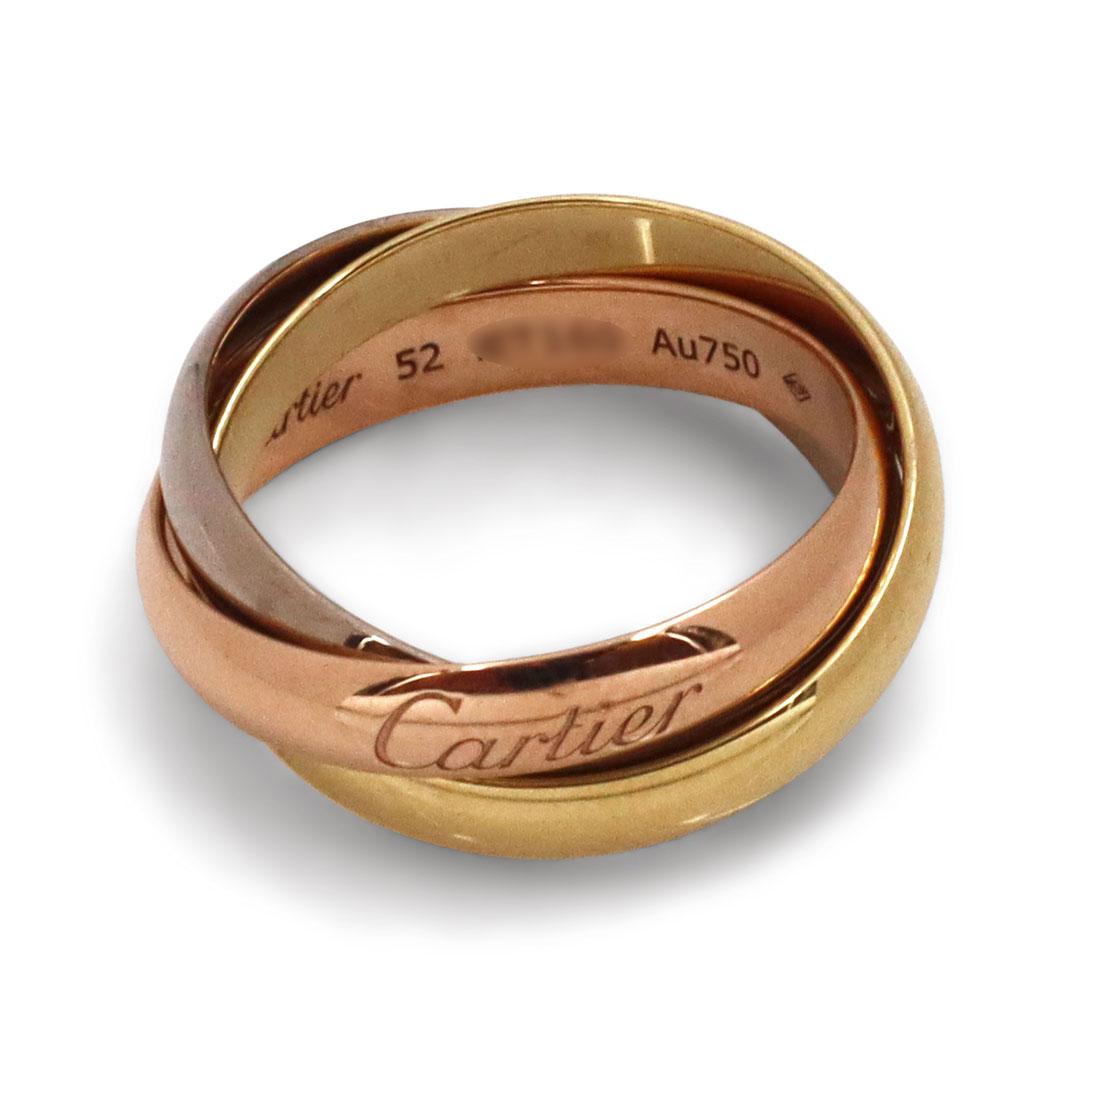 Authentic Cartier 'Trinity' ring comprised of interlocking bands of 18 karat yellow, rose, and white gold. Signed Cartier, 750, 52, with serial number. Ring size 52 (US 6). Each band measures 3.5mm wide. The ring is presented with the original box